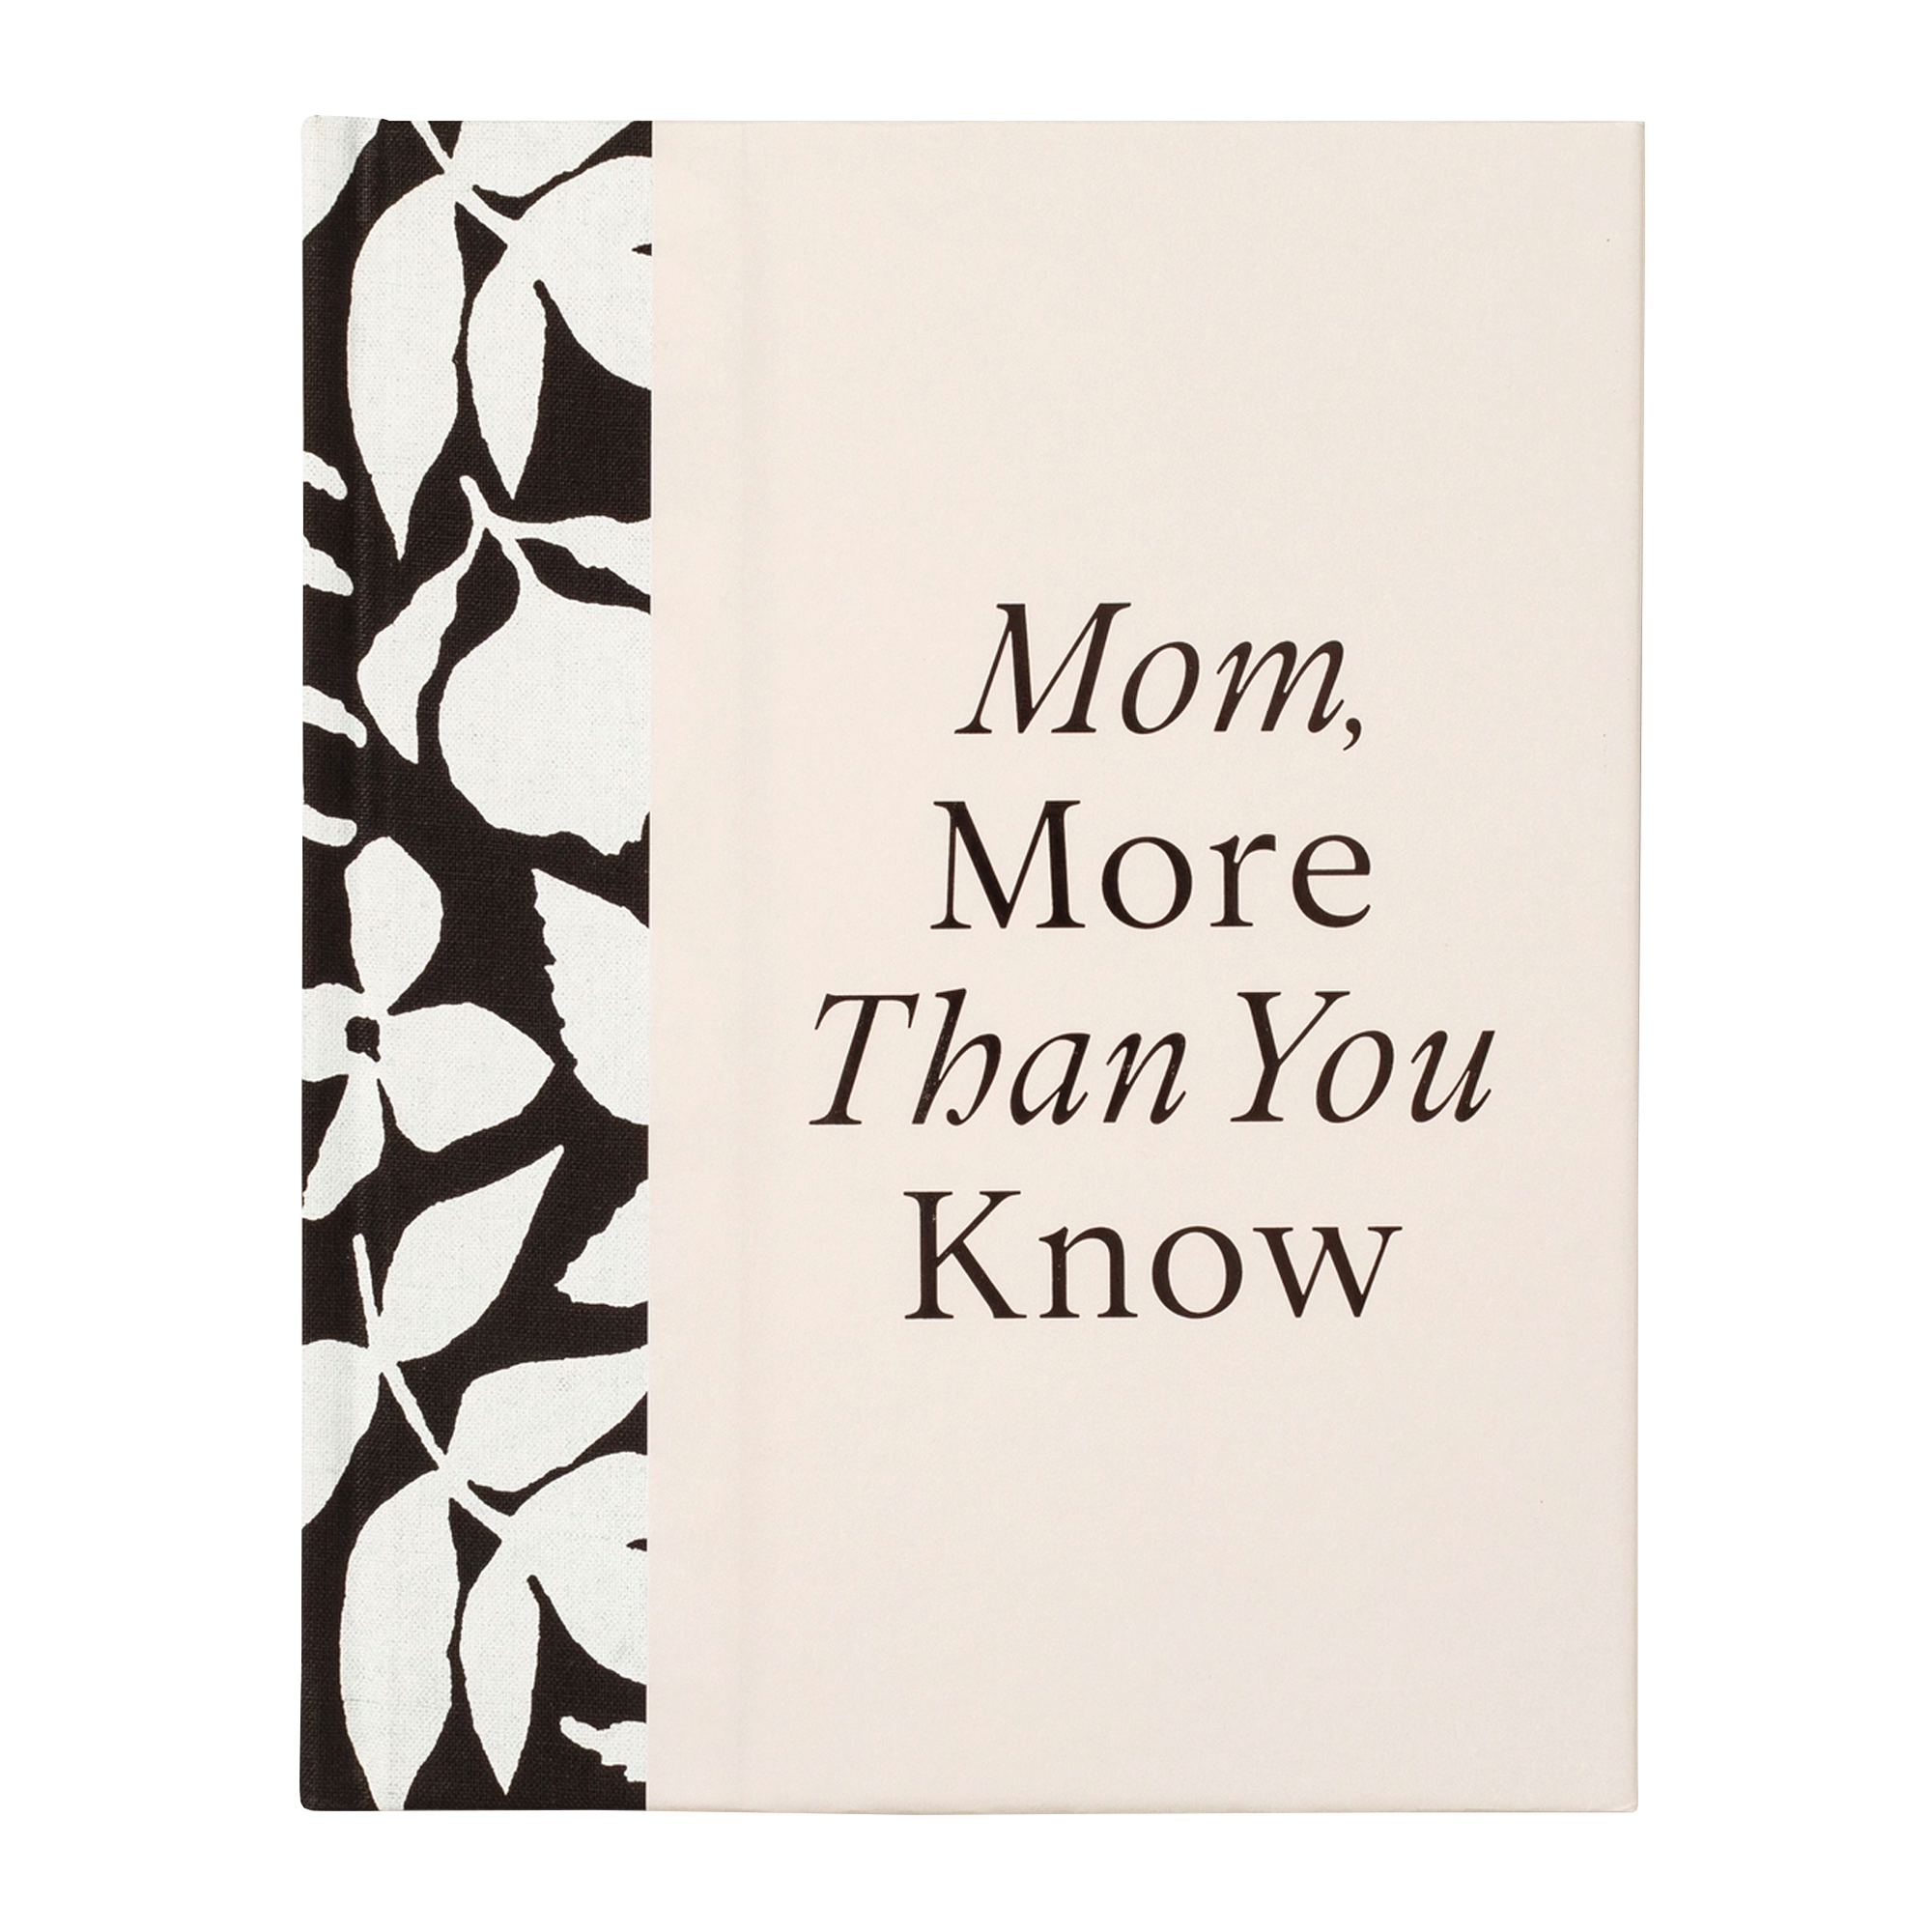 What I Love About Mom Fill-In-The-Blank Gift Journal